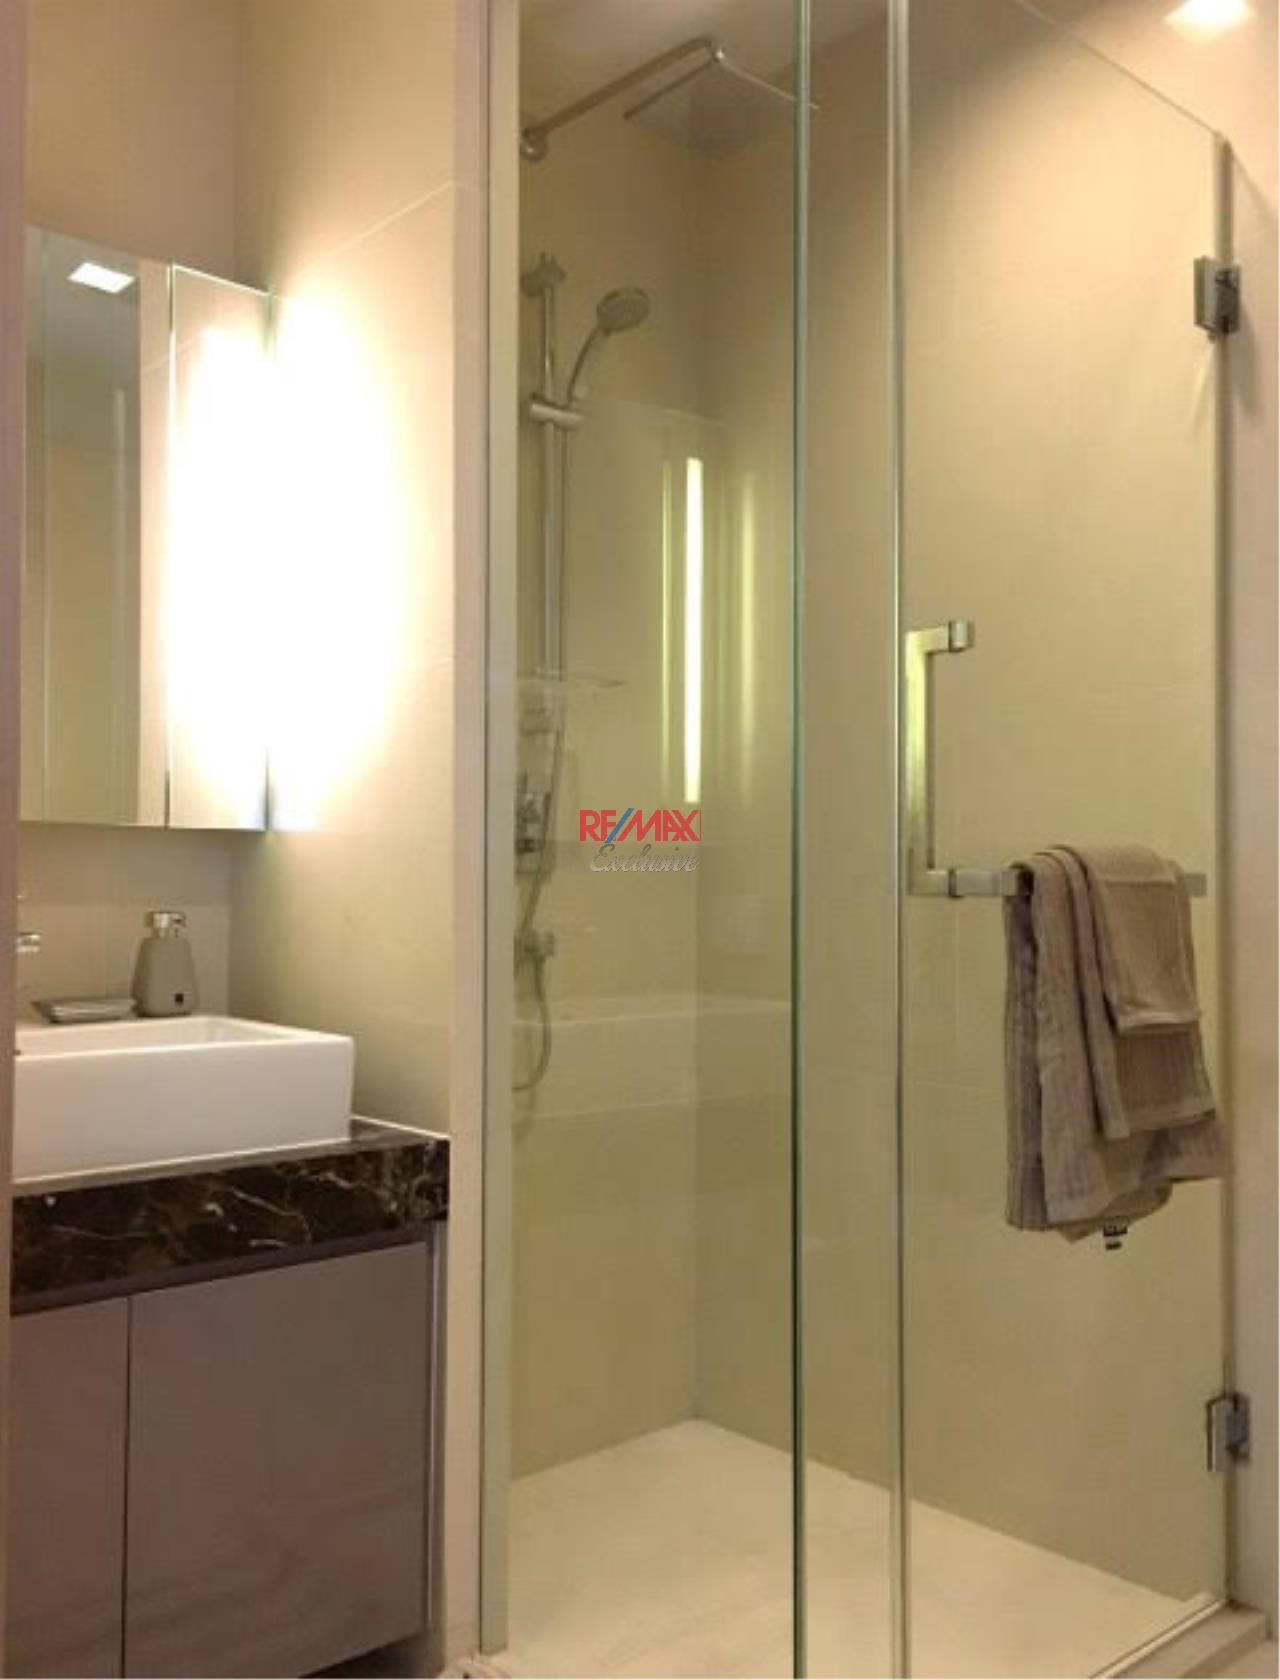 RE/MAX Exclusive Agency's Condominium in town For Rent 40,000 THB  5